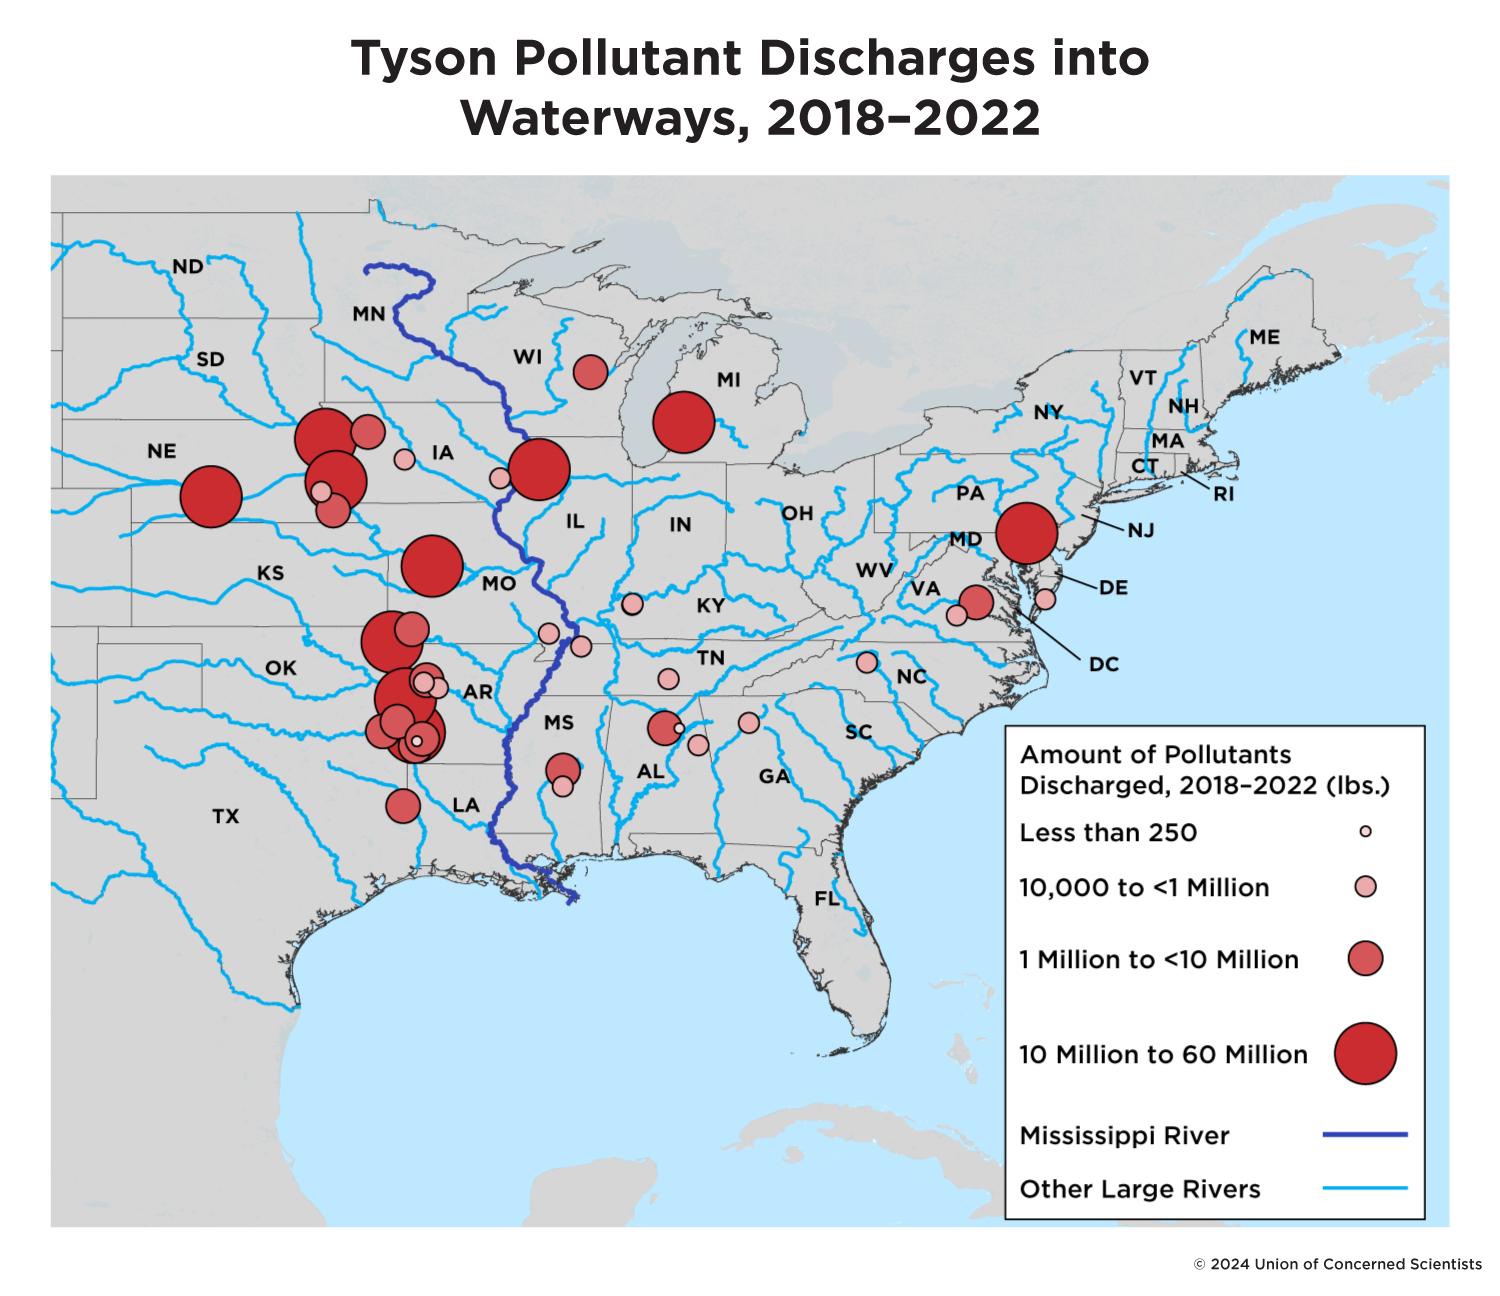 A map of the United States with circles in shades of red that represent Tyson meat processing plants, with the size of the circles based on the amount of pollutants discharged